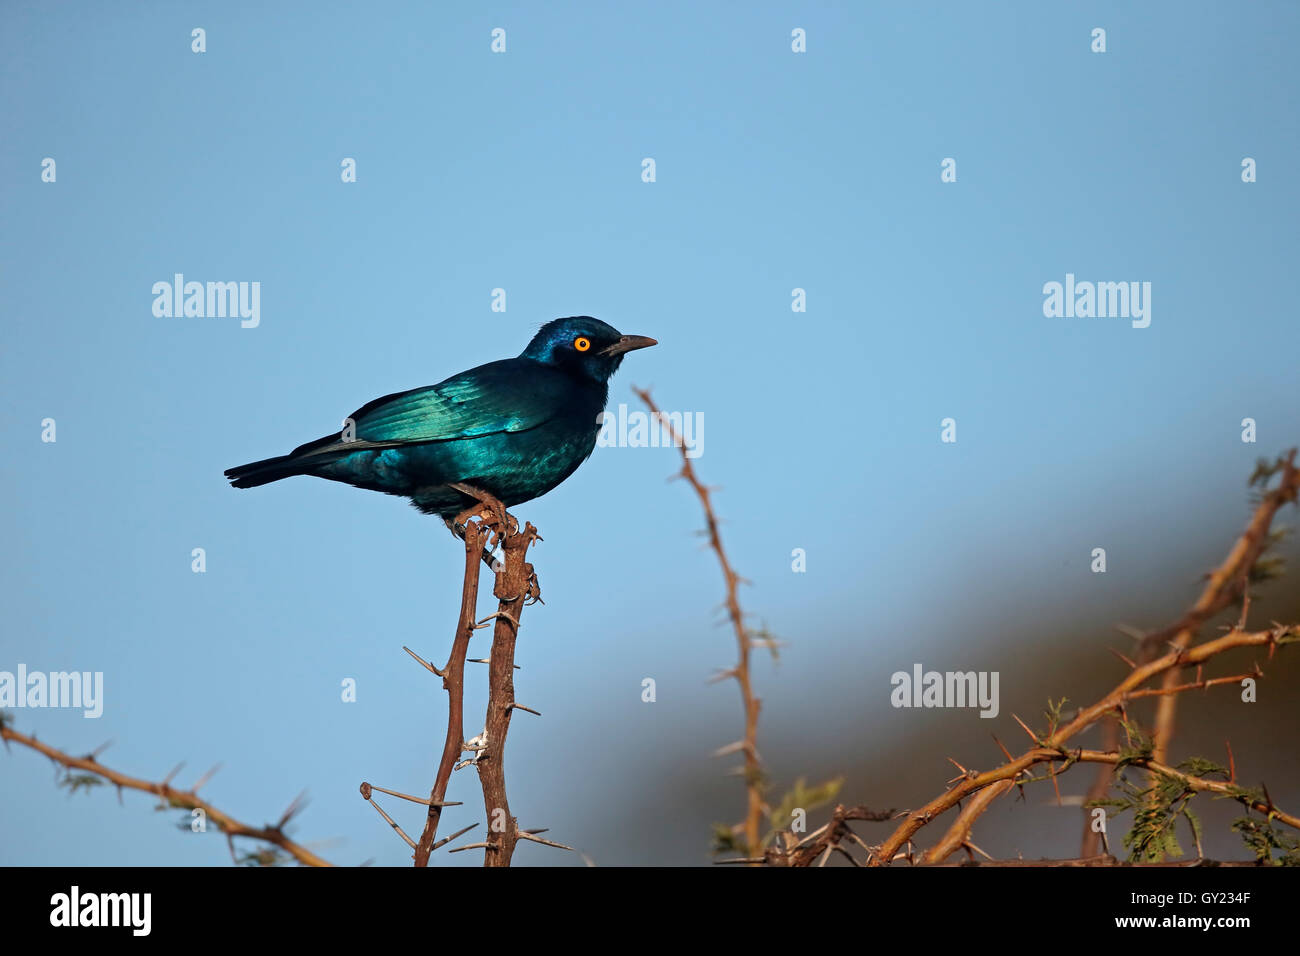 Cape-glossy starling, Lamprotornis nitens, single bird on branch, South Africa, August 2016 Stock Photo